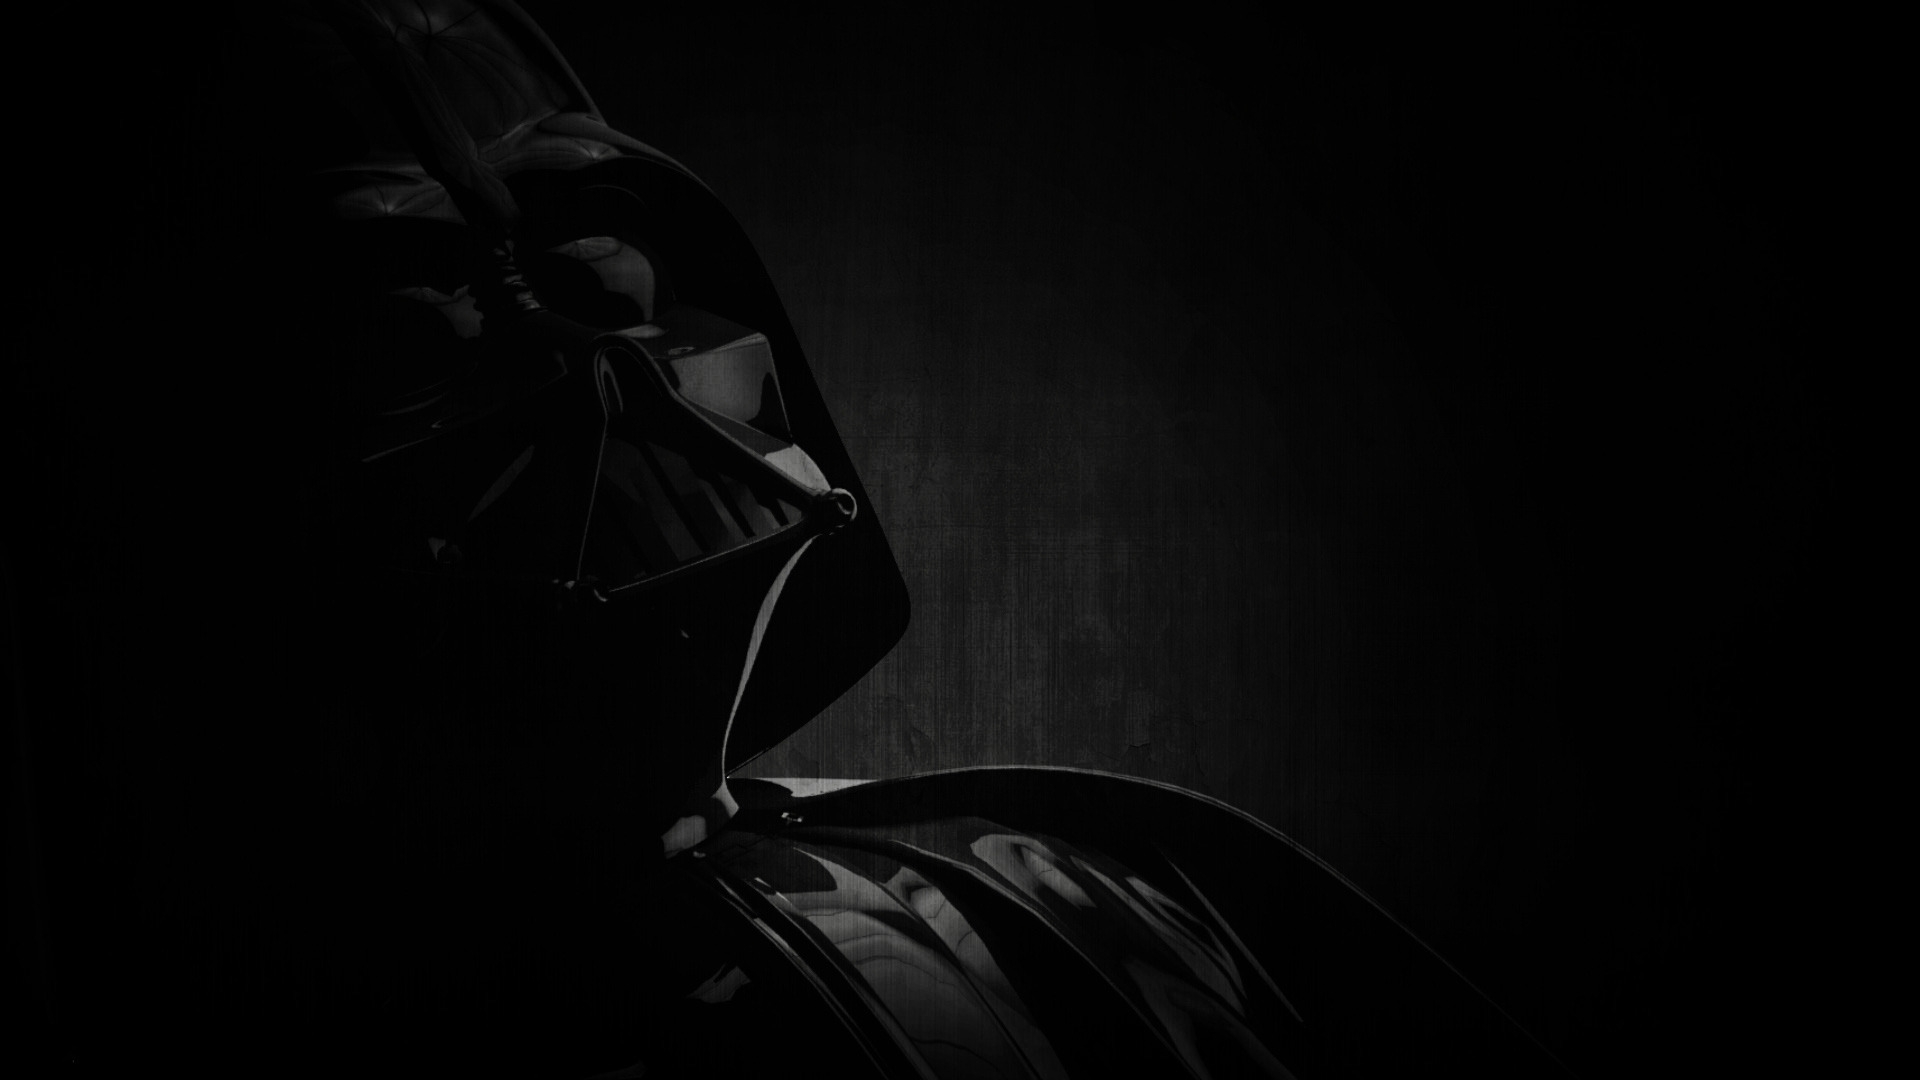 Darth Vader Character, for 1920 x 1080 HDTV 1080p resolution